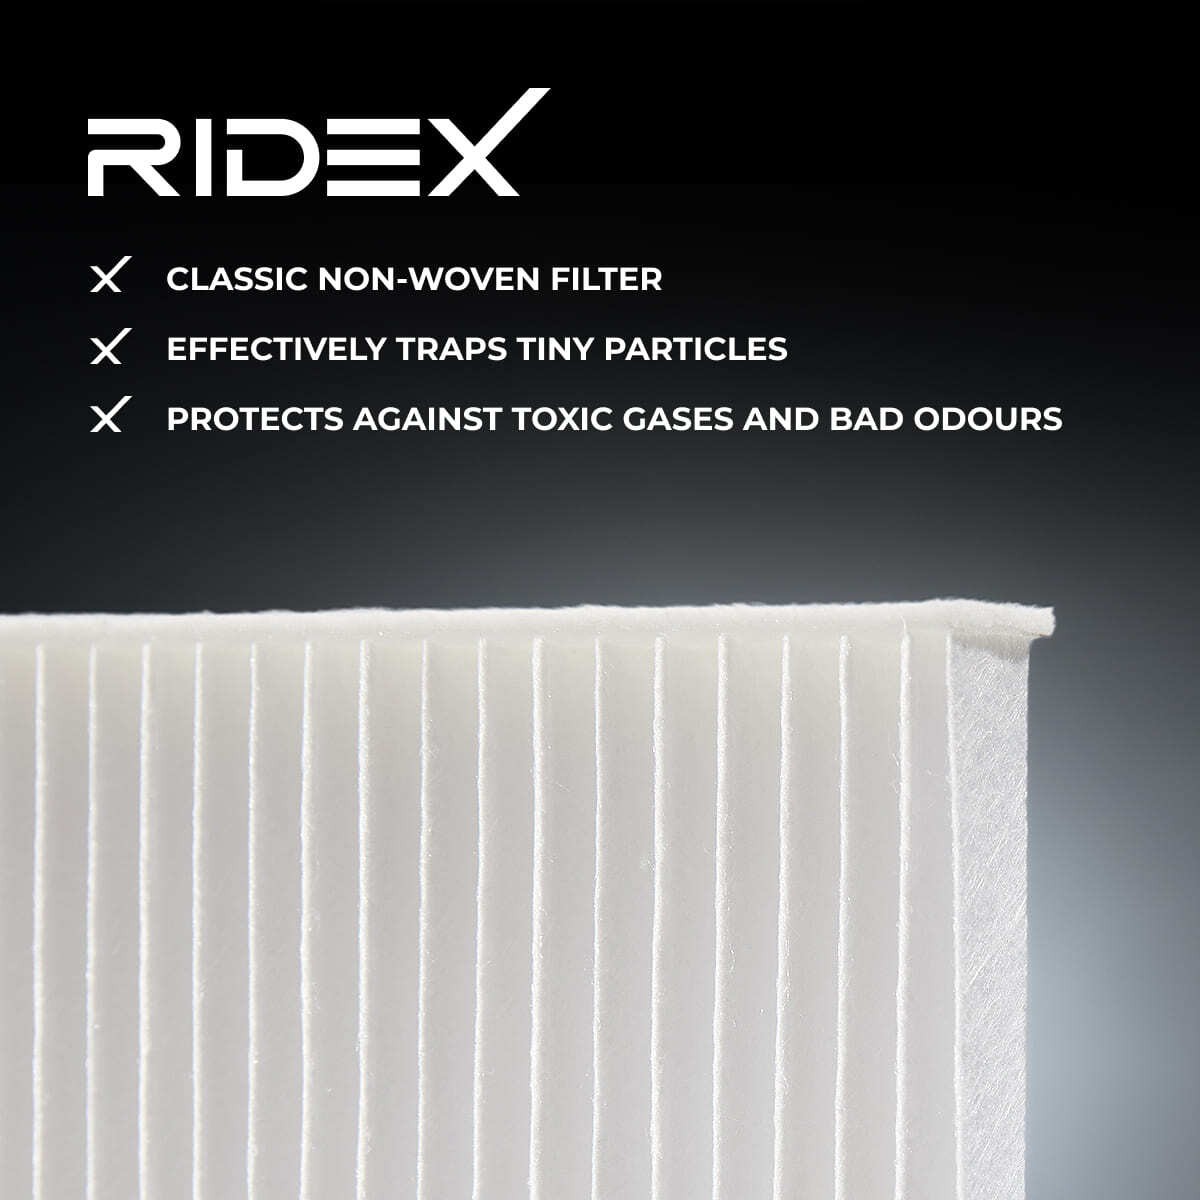 424I0468 Air con filter 424I0468 RIDEX Activated Carbon Filter, 215 mm x 185 mm x 29 mm